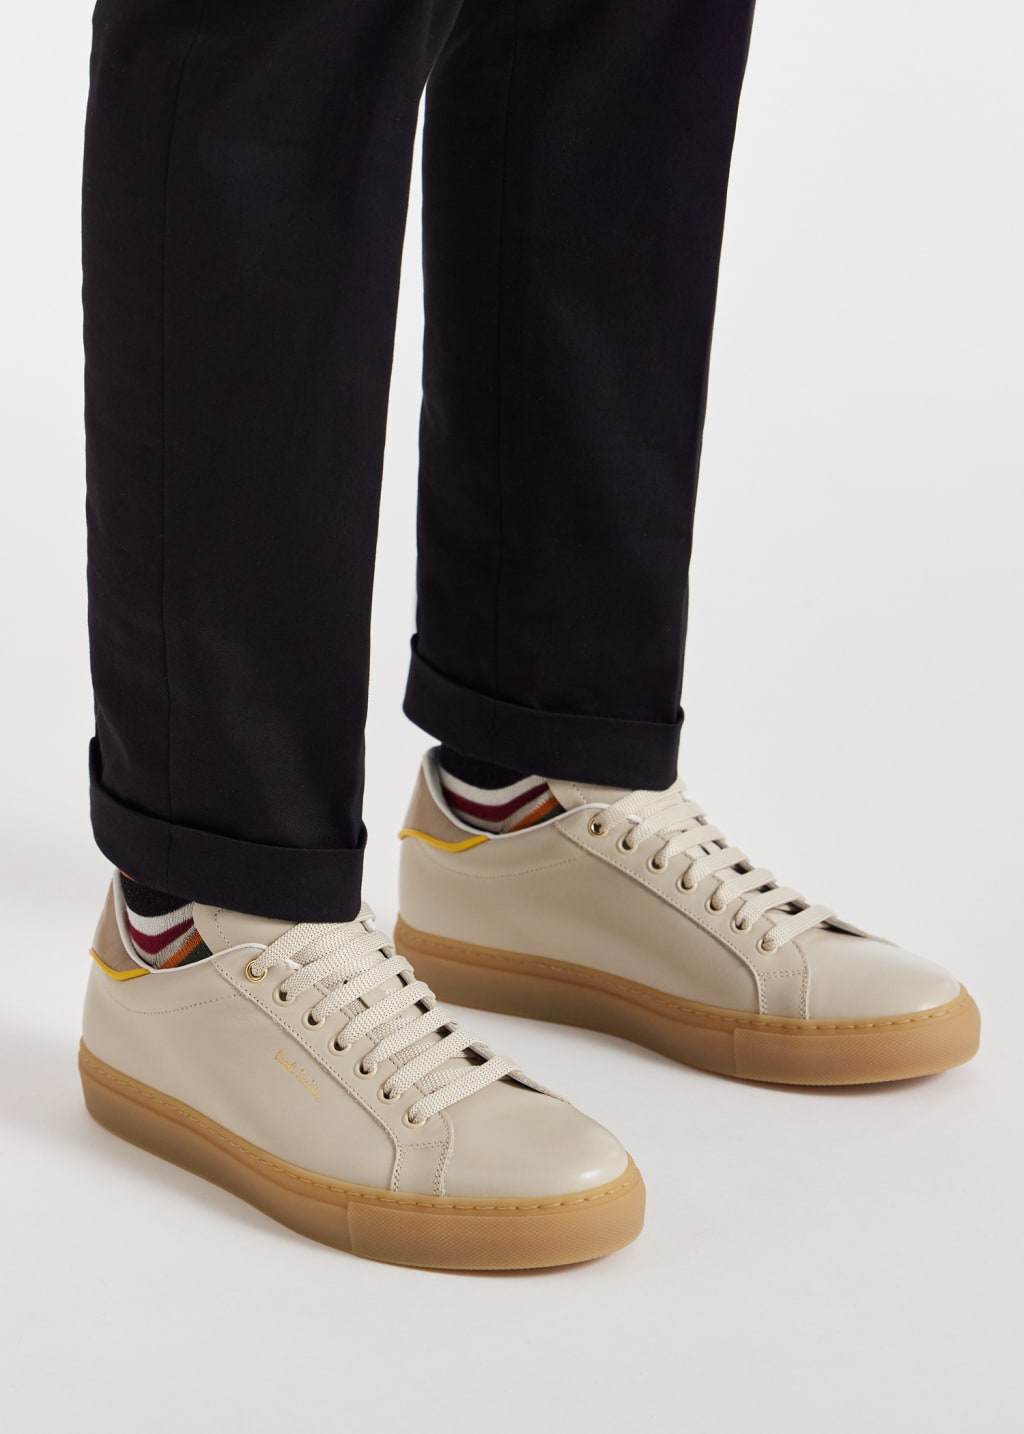 Model View - Stone Leather 'Beck' Trainers Paul Smith